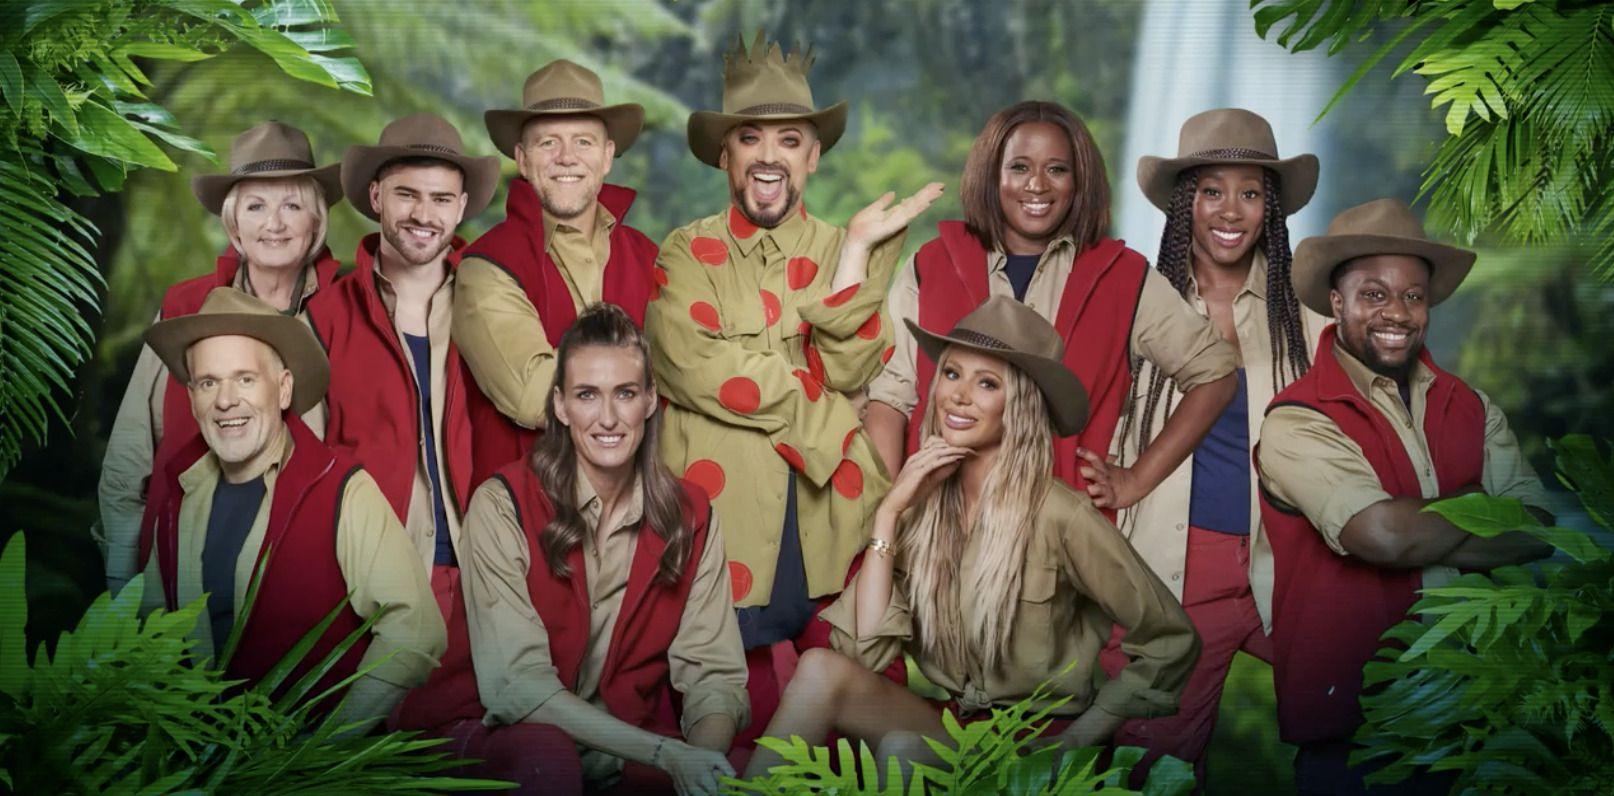 Entertainment News: I'm a Celebrity, Get Me Out Of Here 2022